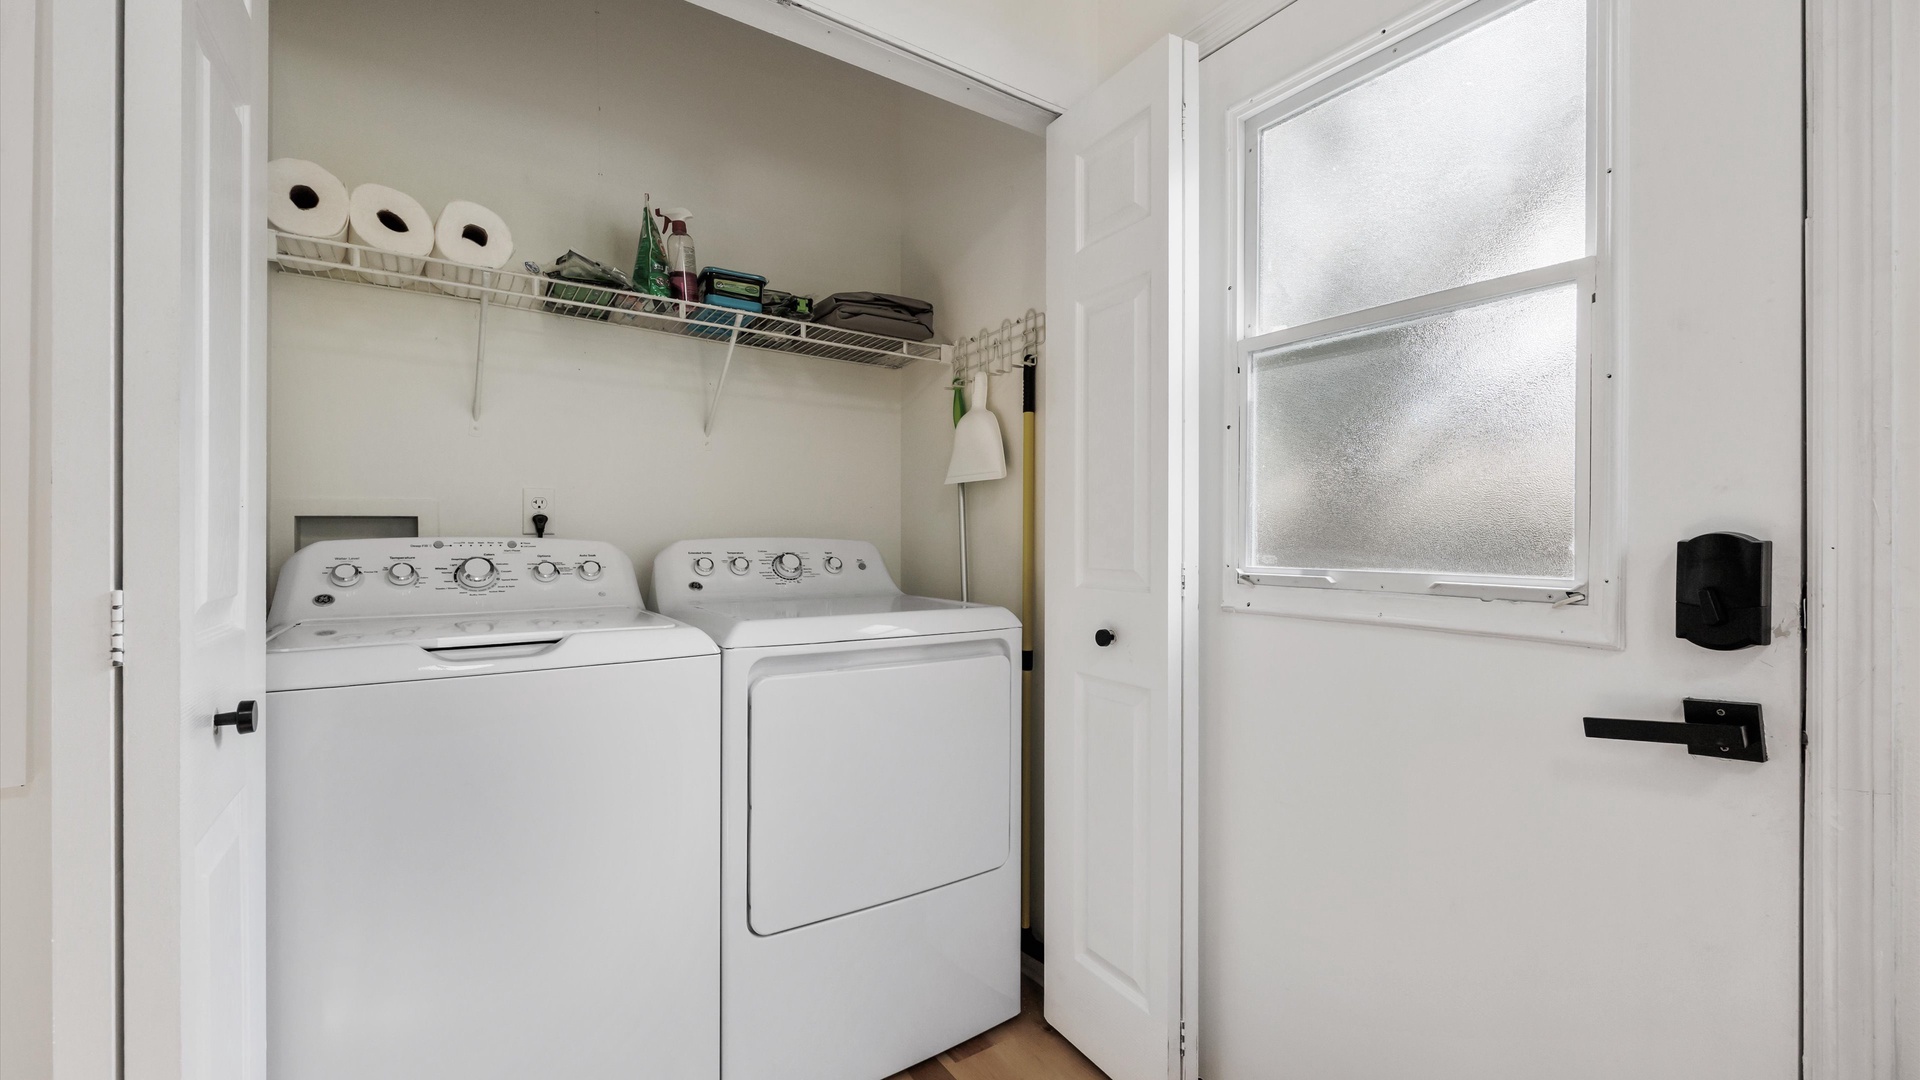 Private laundry is available for your stay, located near the kitchen